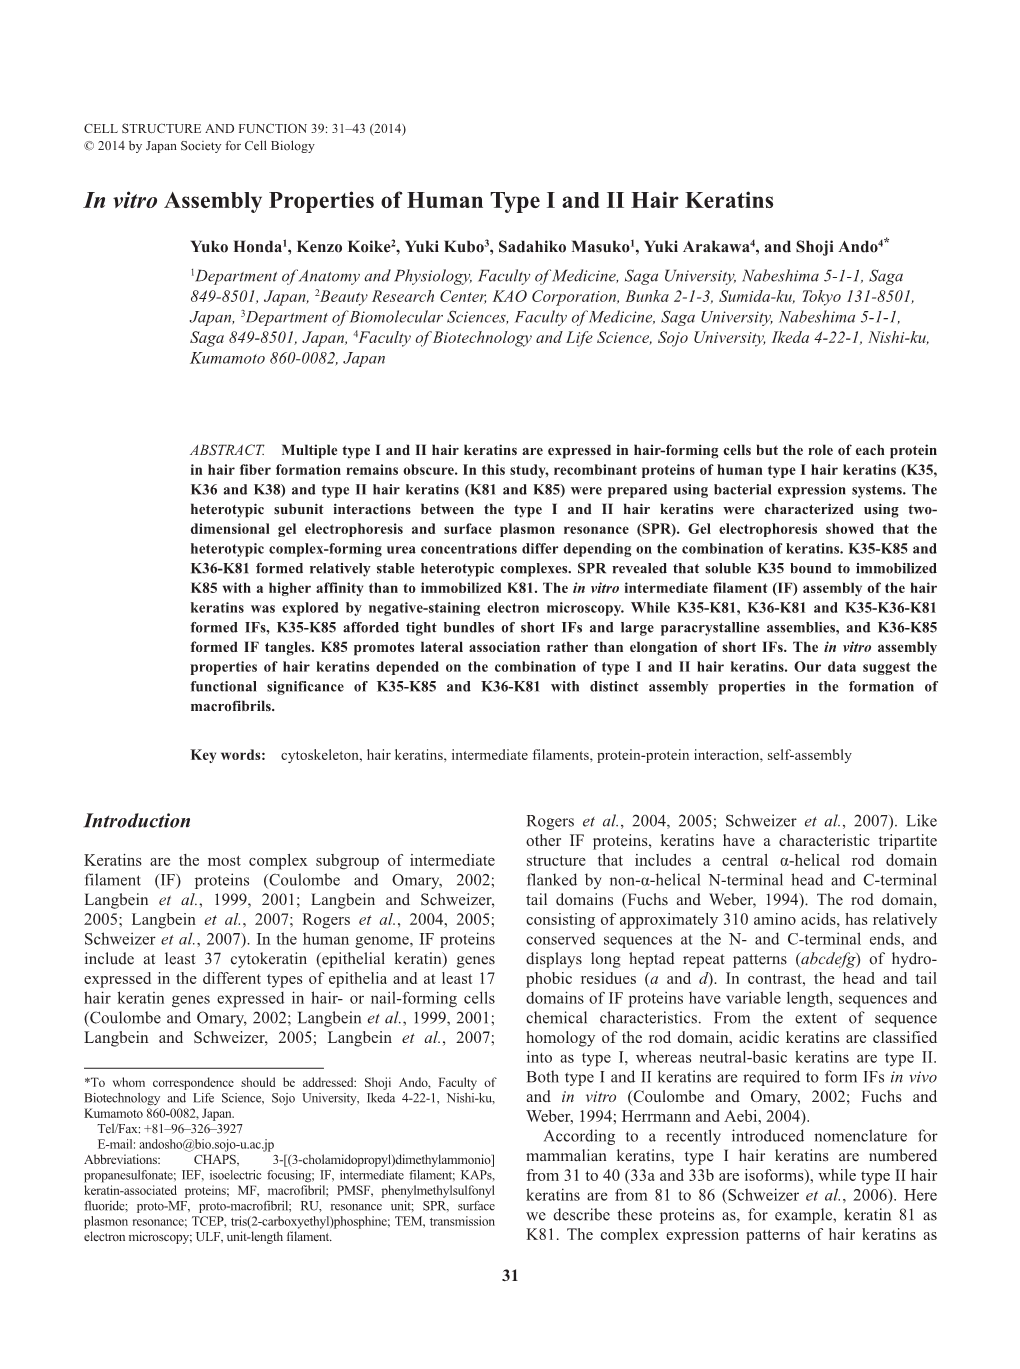 In Vitro Assembly Properties of Human Type I and II Hair Keratins